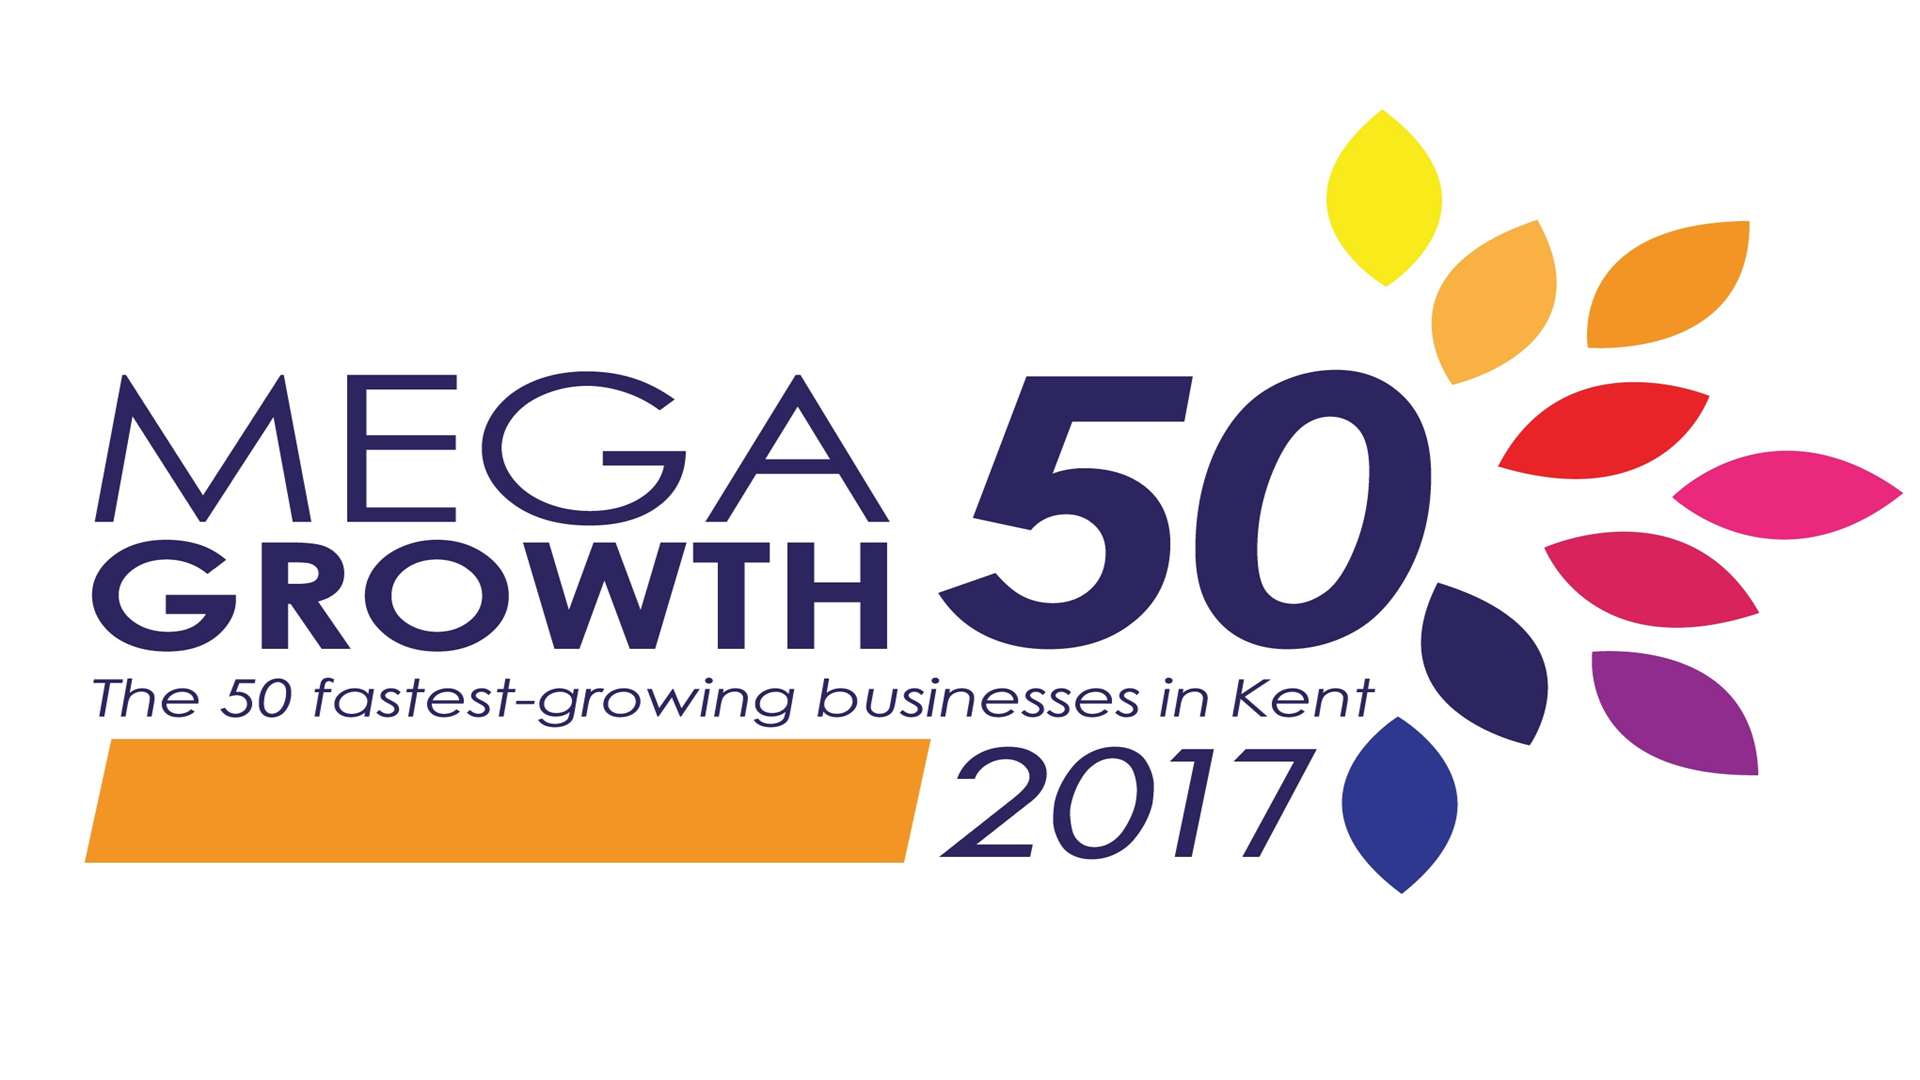 The MegaGrowth 50 is in its 16th year